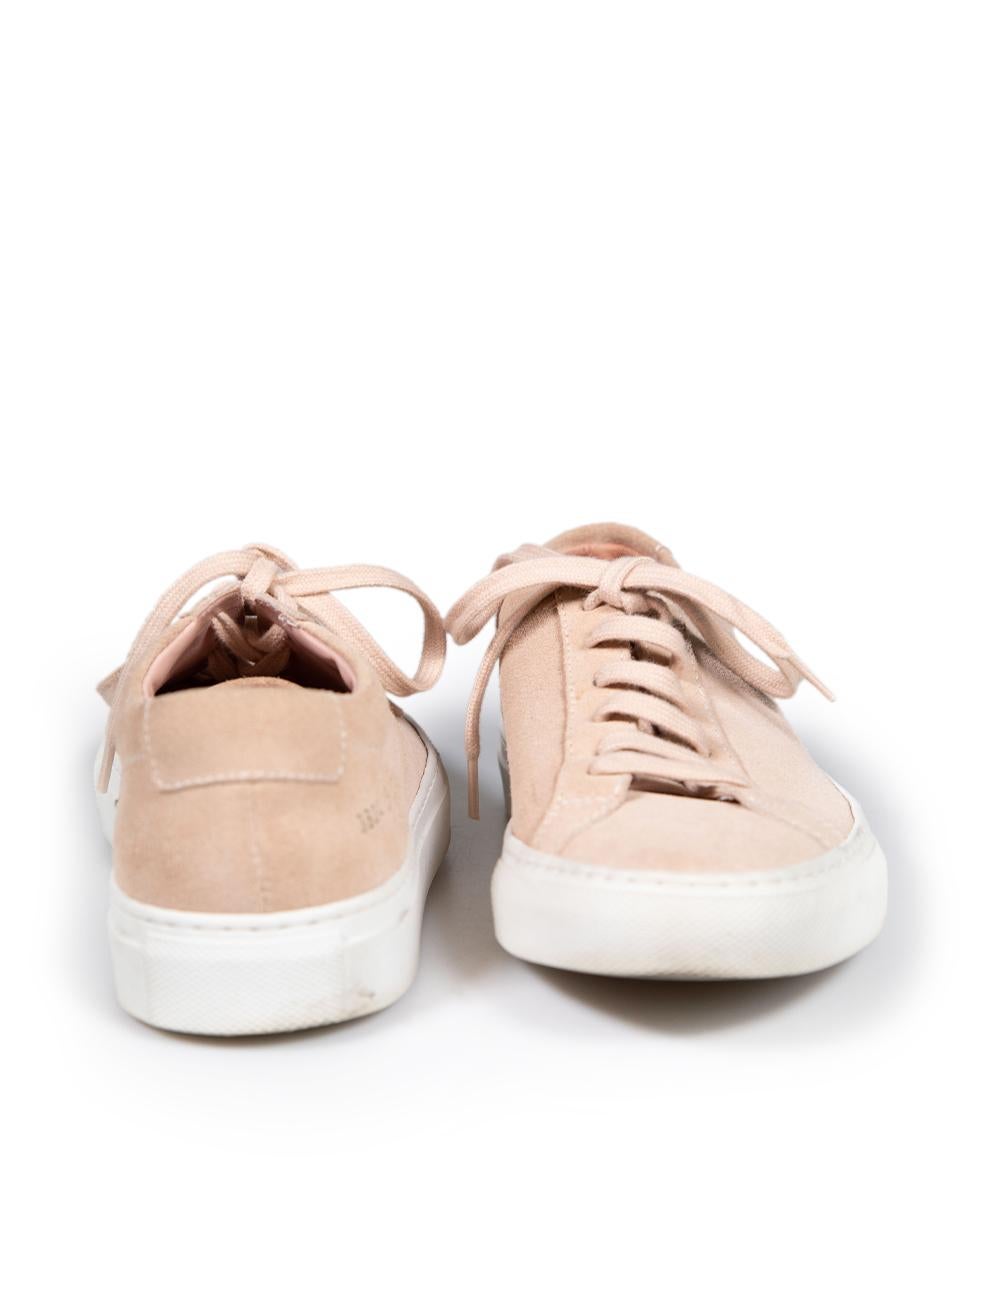 Common Projects Pink Suede Achilles Low Trainers Size IT 35 In Excellent Condition For Sale In London, GB